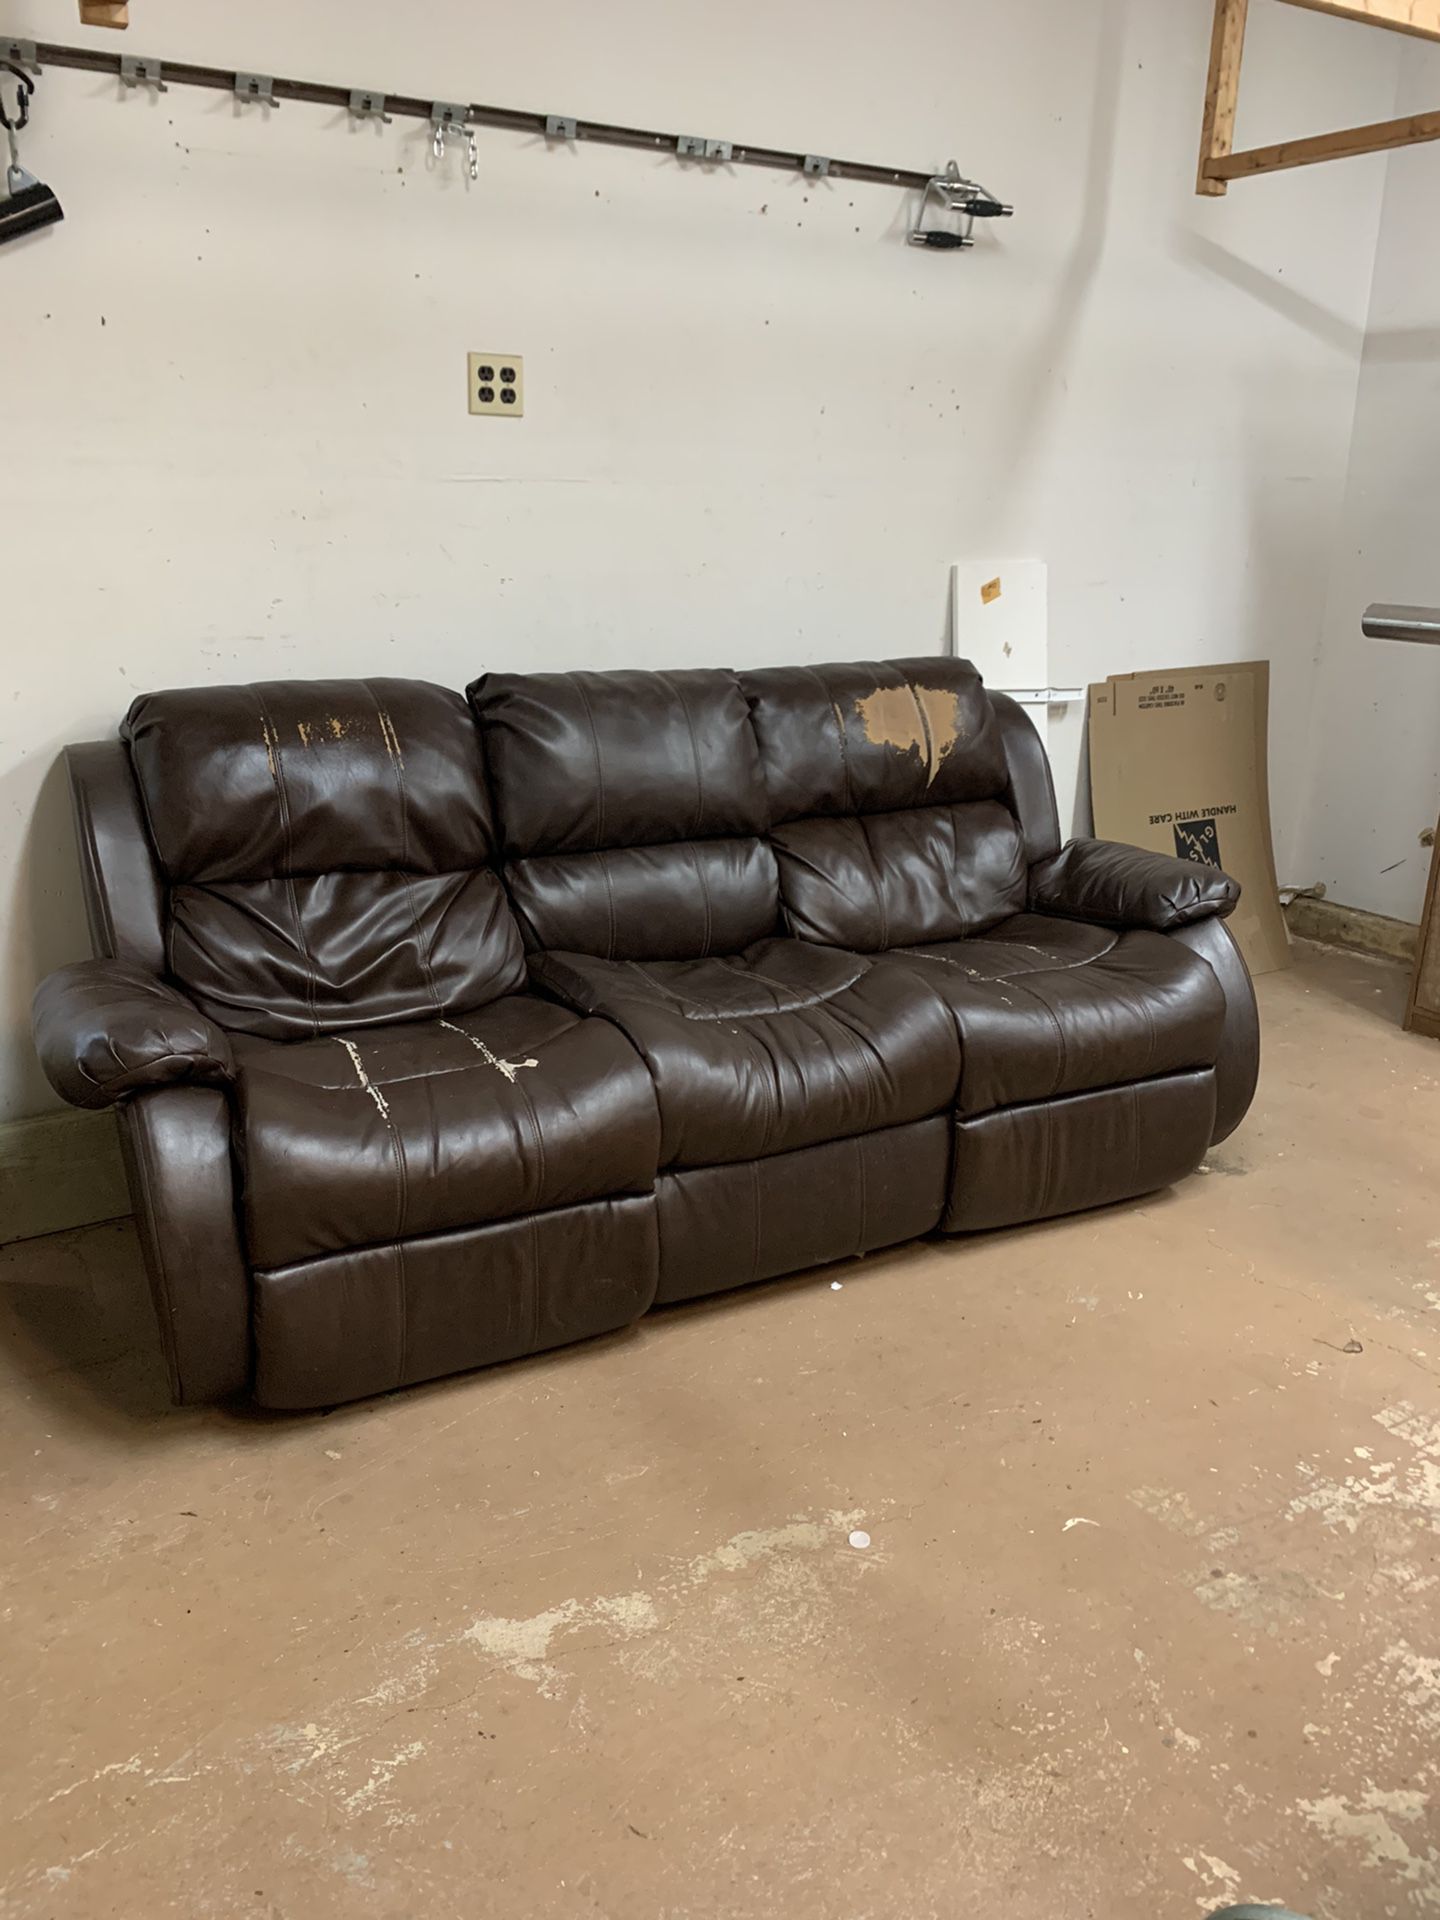 FREE ! Leather feel sofa with two builtin recliners.